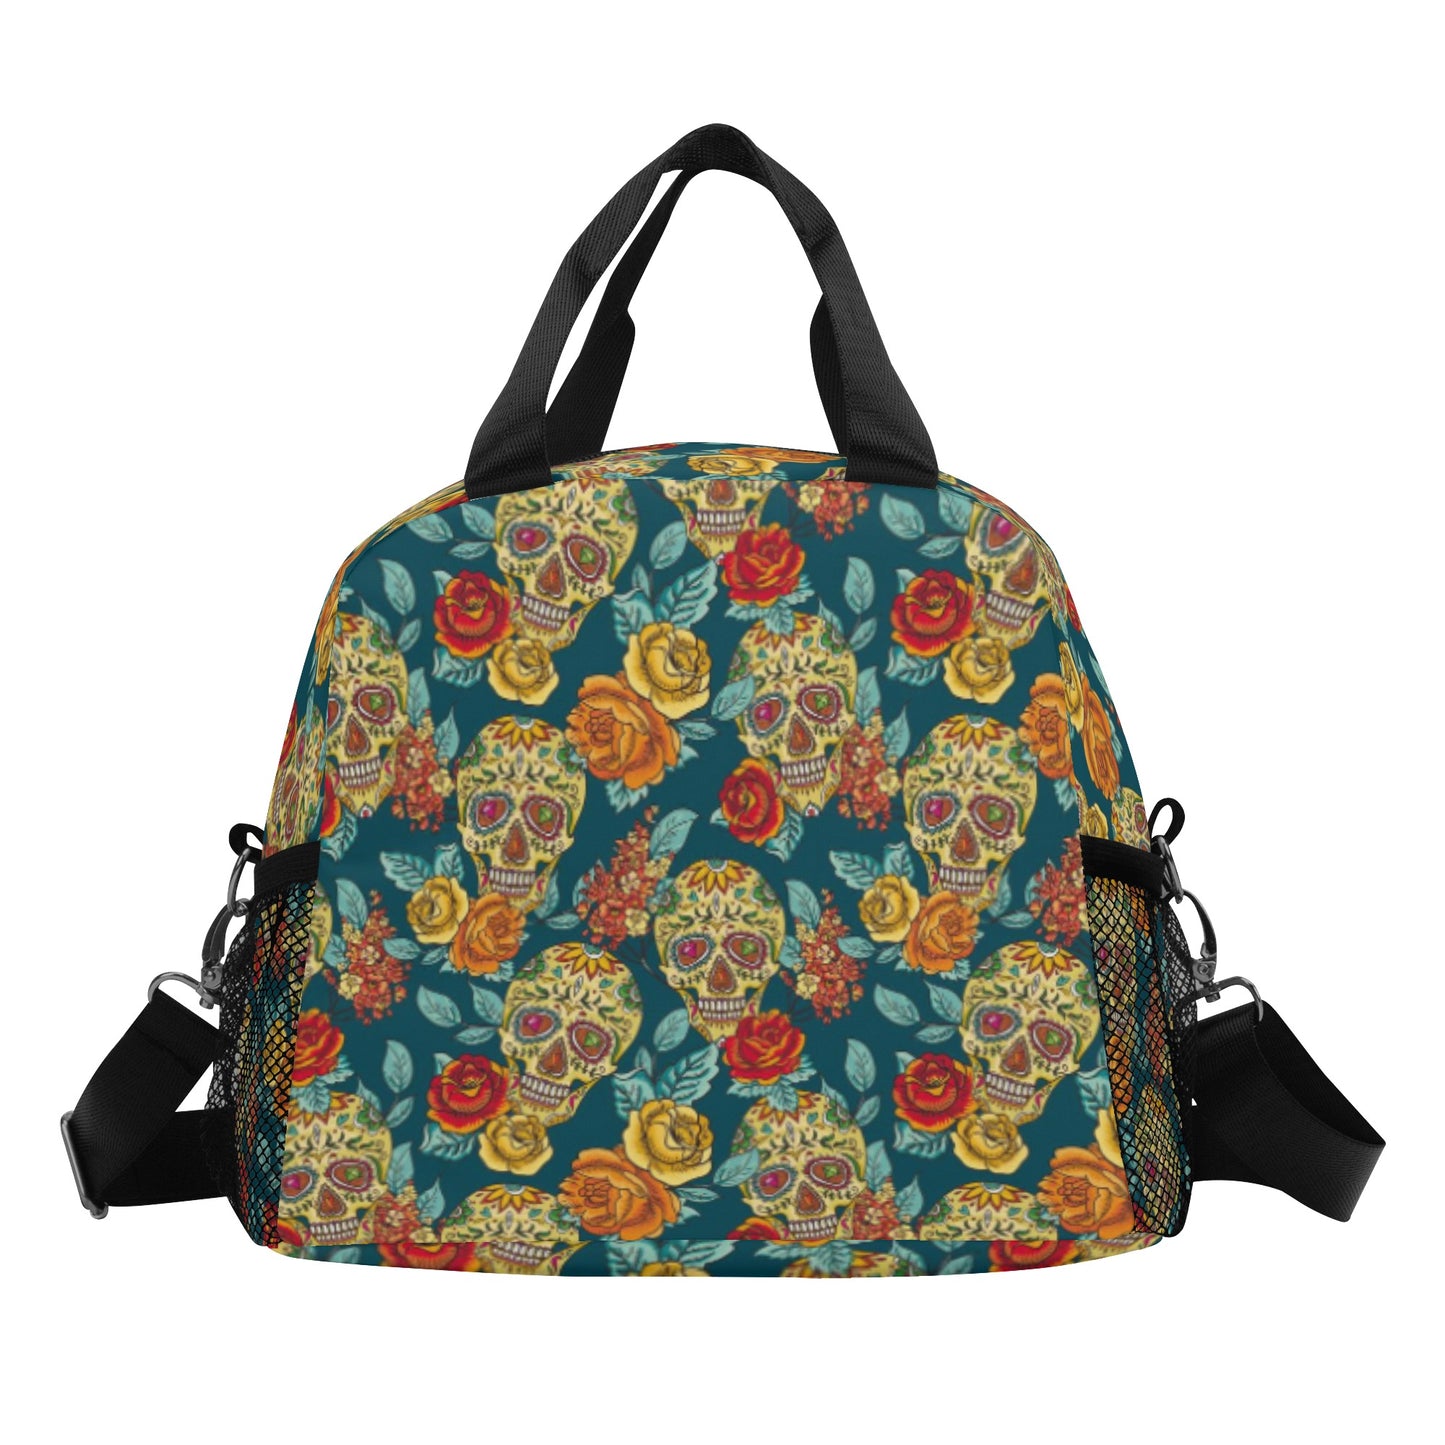 All Floral sugar skull Over Printing Lunch Bag